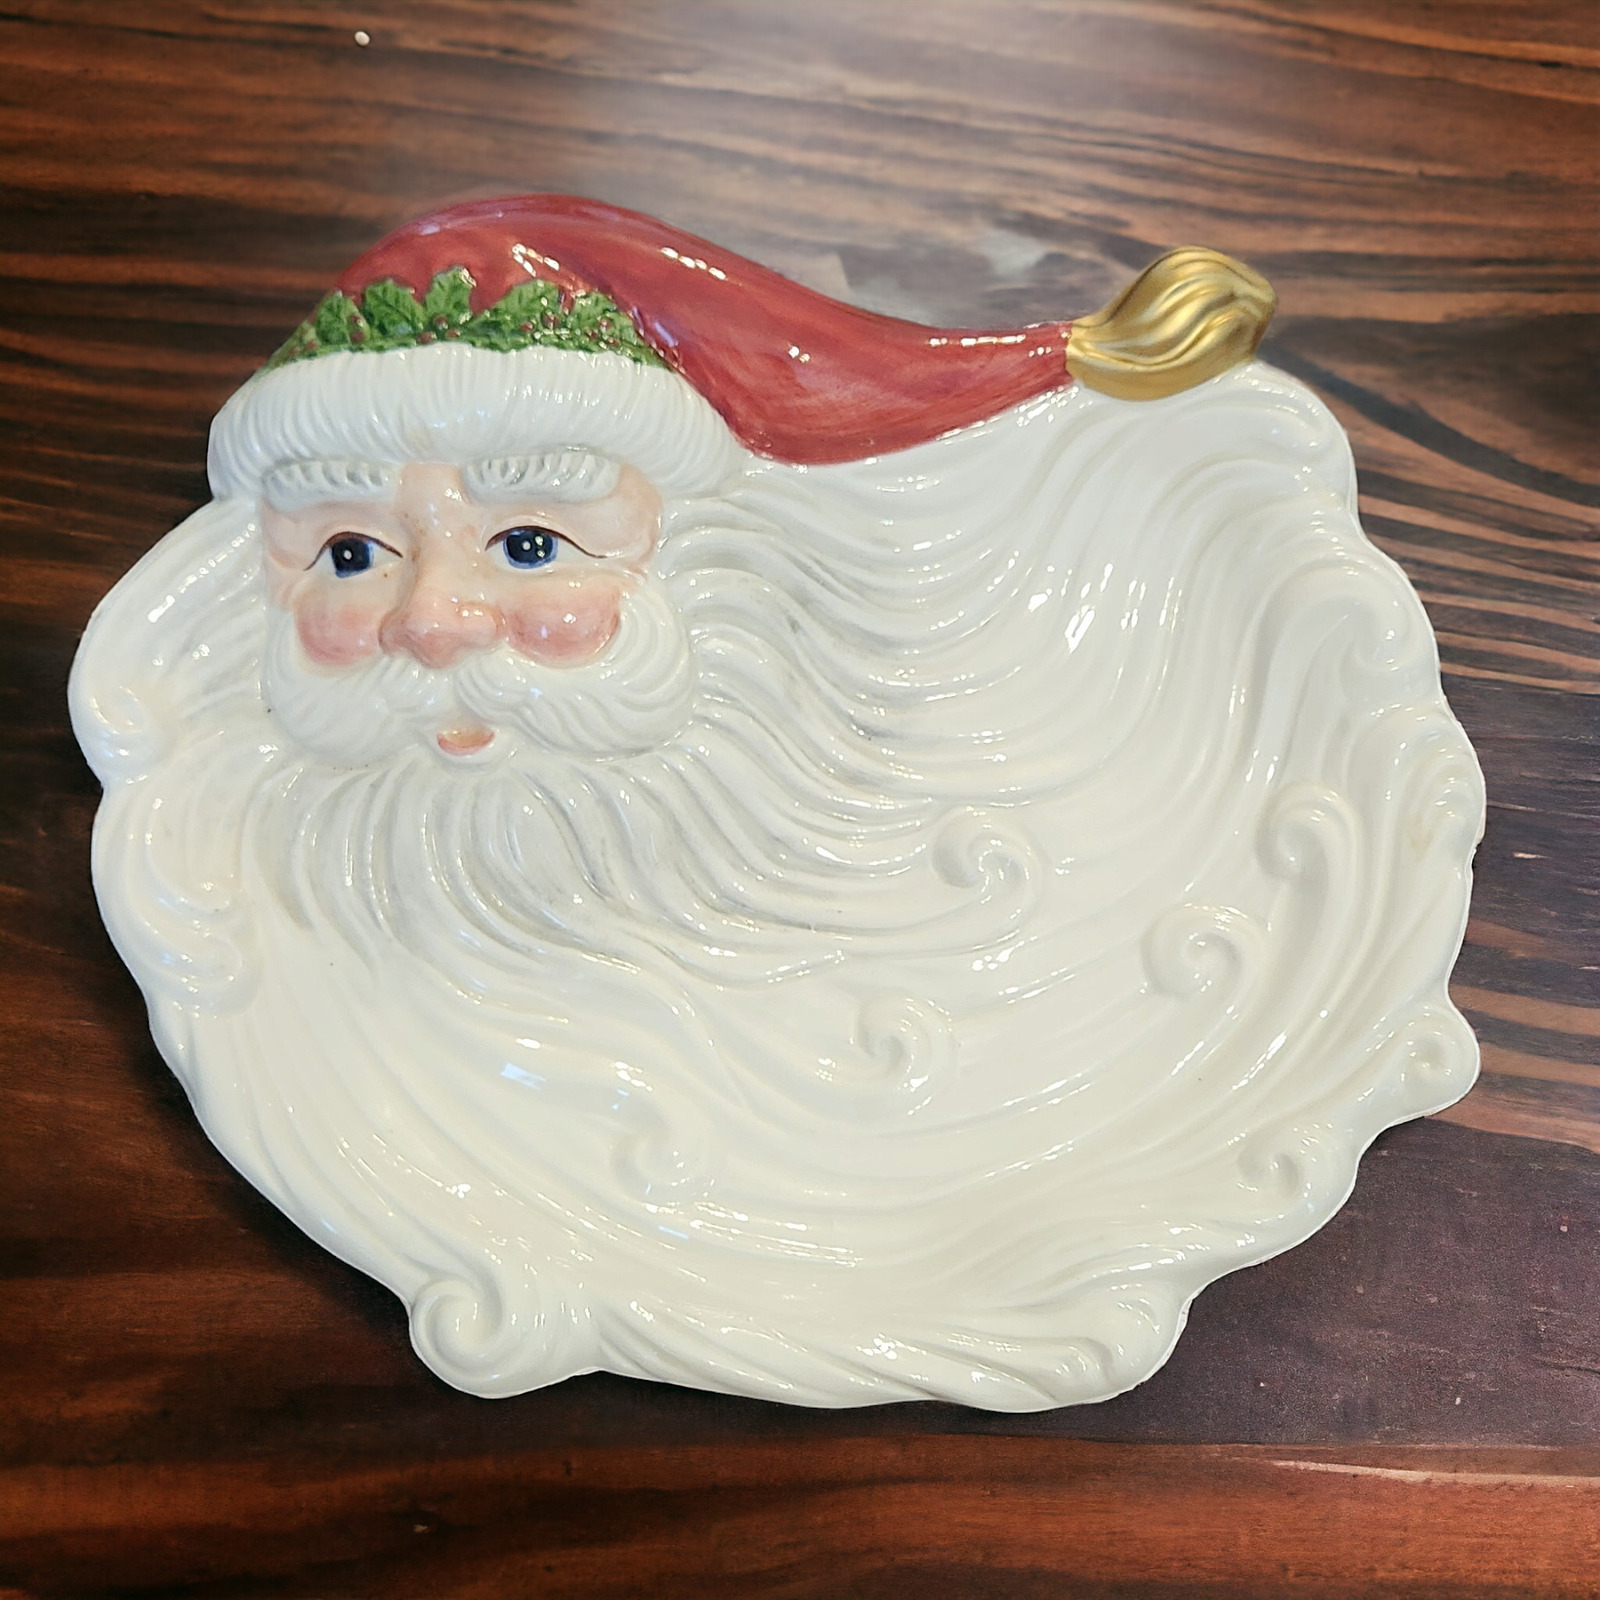 1994 Vintage Omnibus by Fitz and Floyd Handpainted Santa Claus Canape Plate 